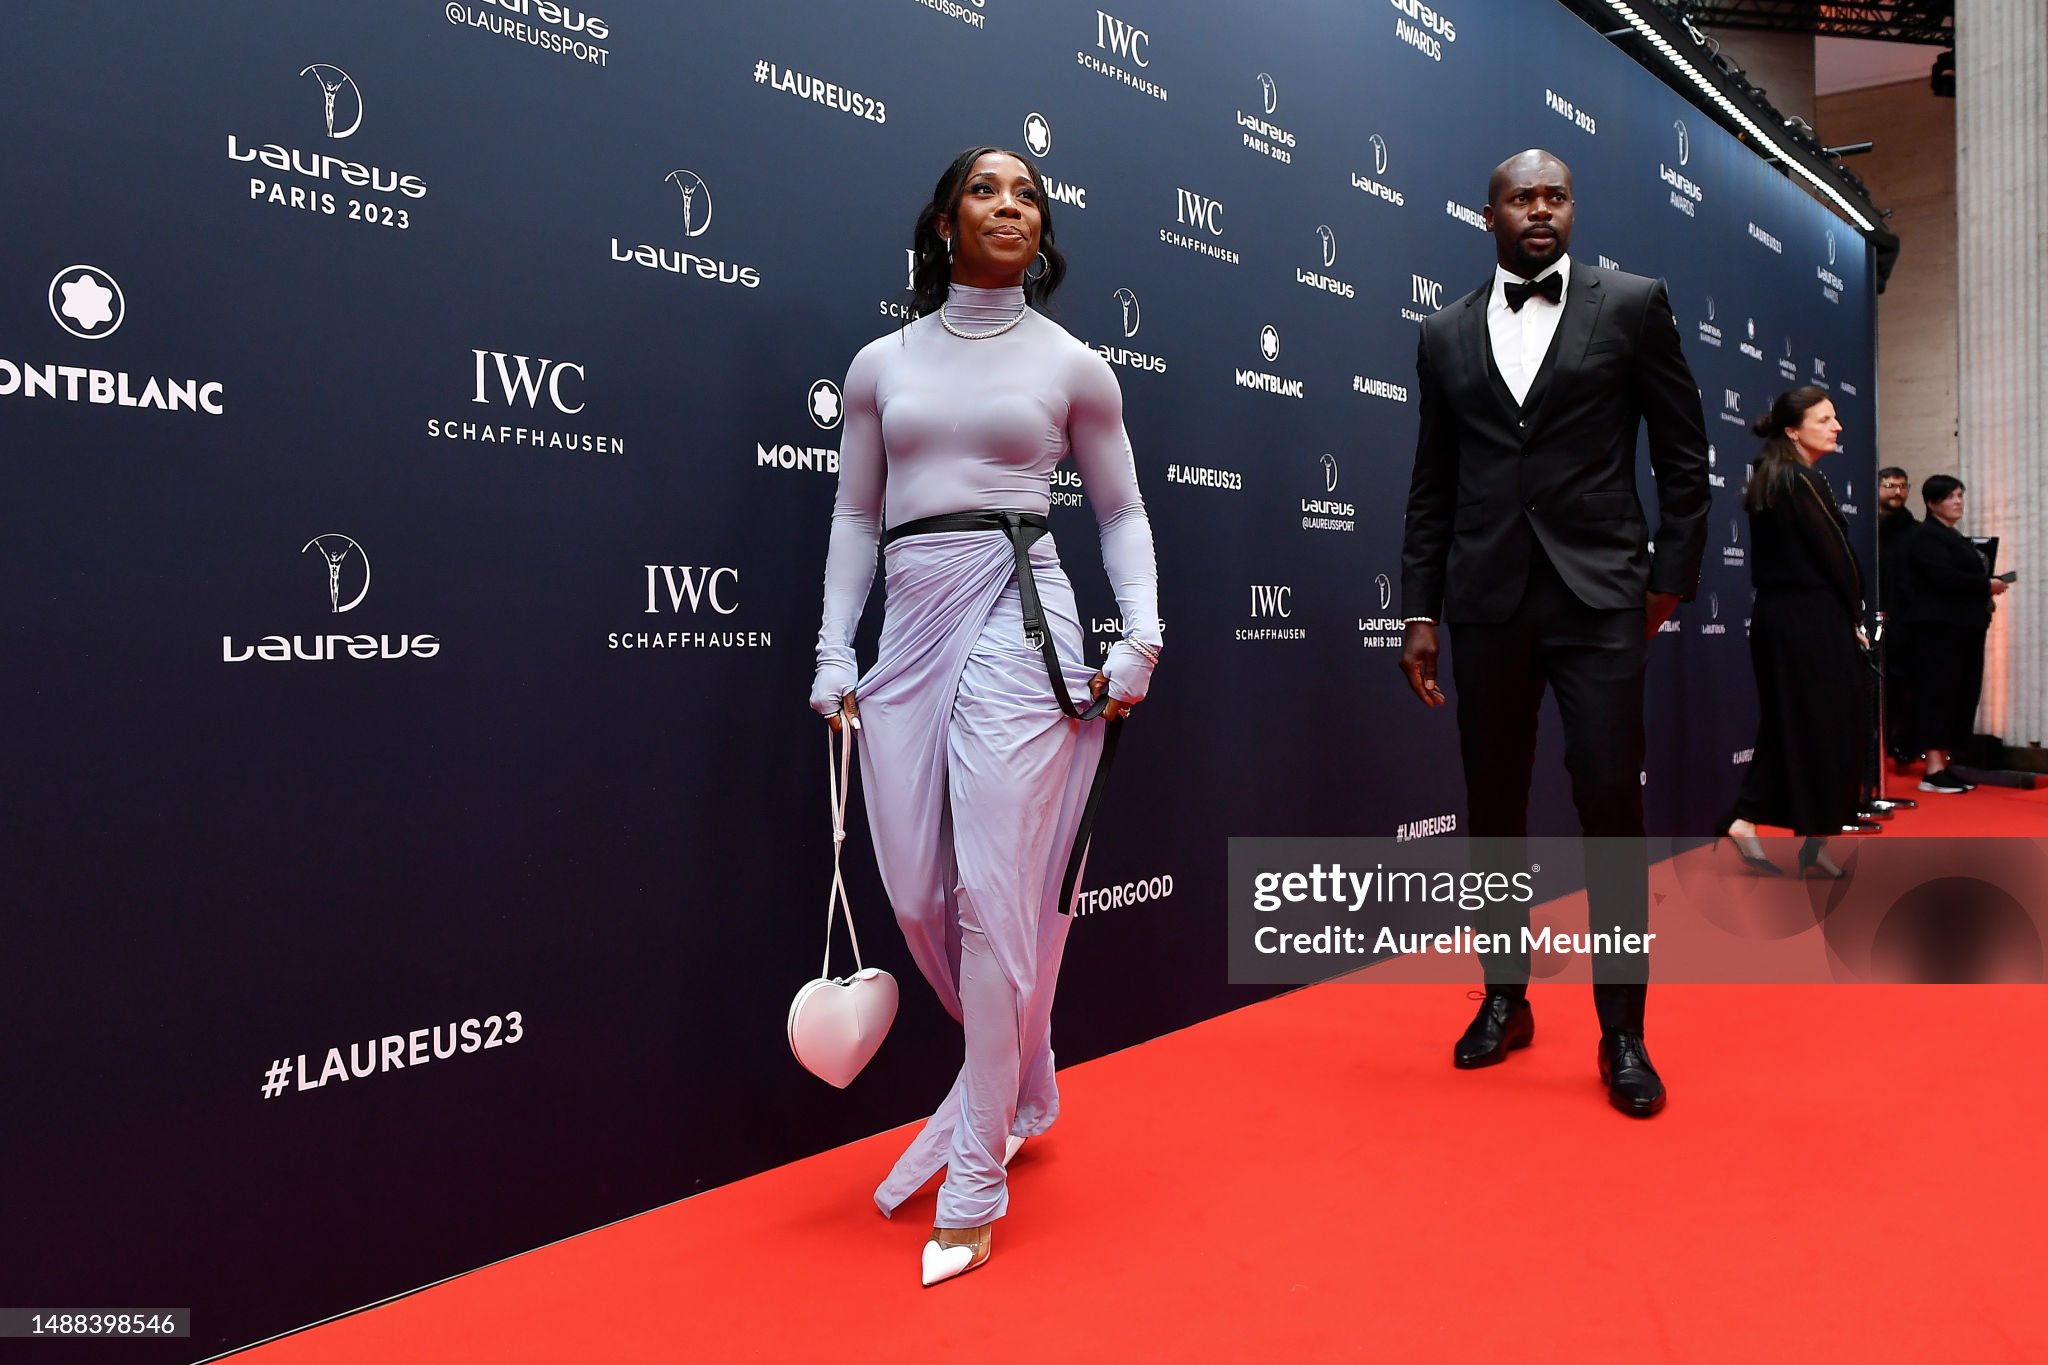 laureus-world-sportswoman-of-the-year-2023-nominee-shelly-ann-fraser-pryce-arrives-at-the-2023.jpg